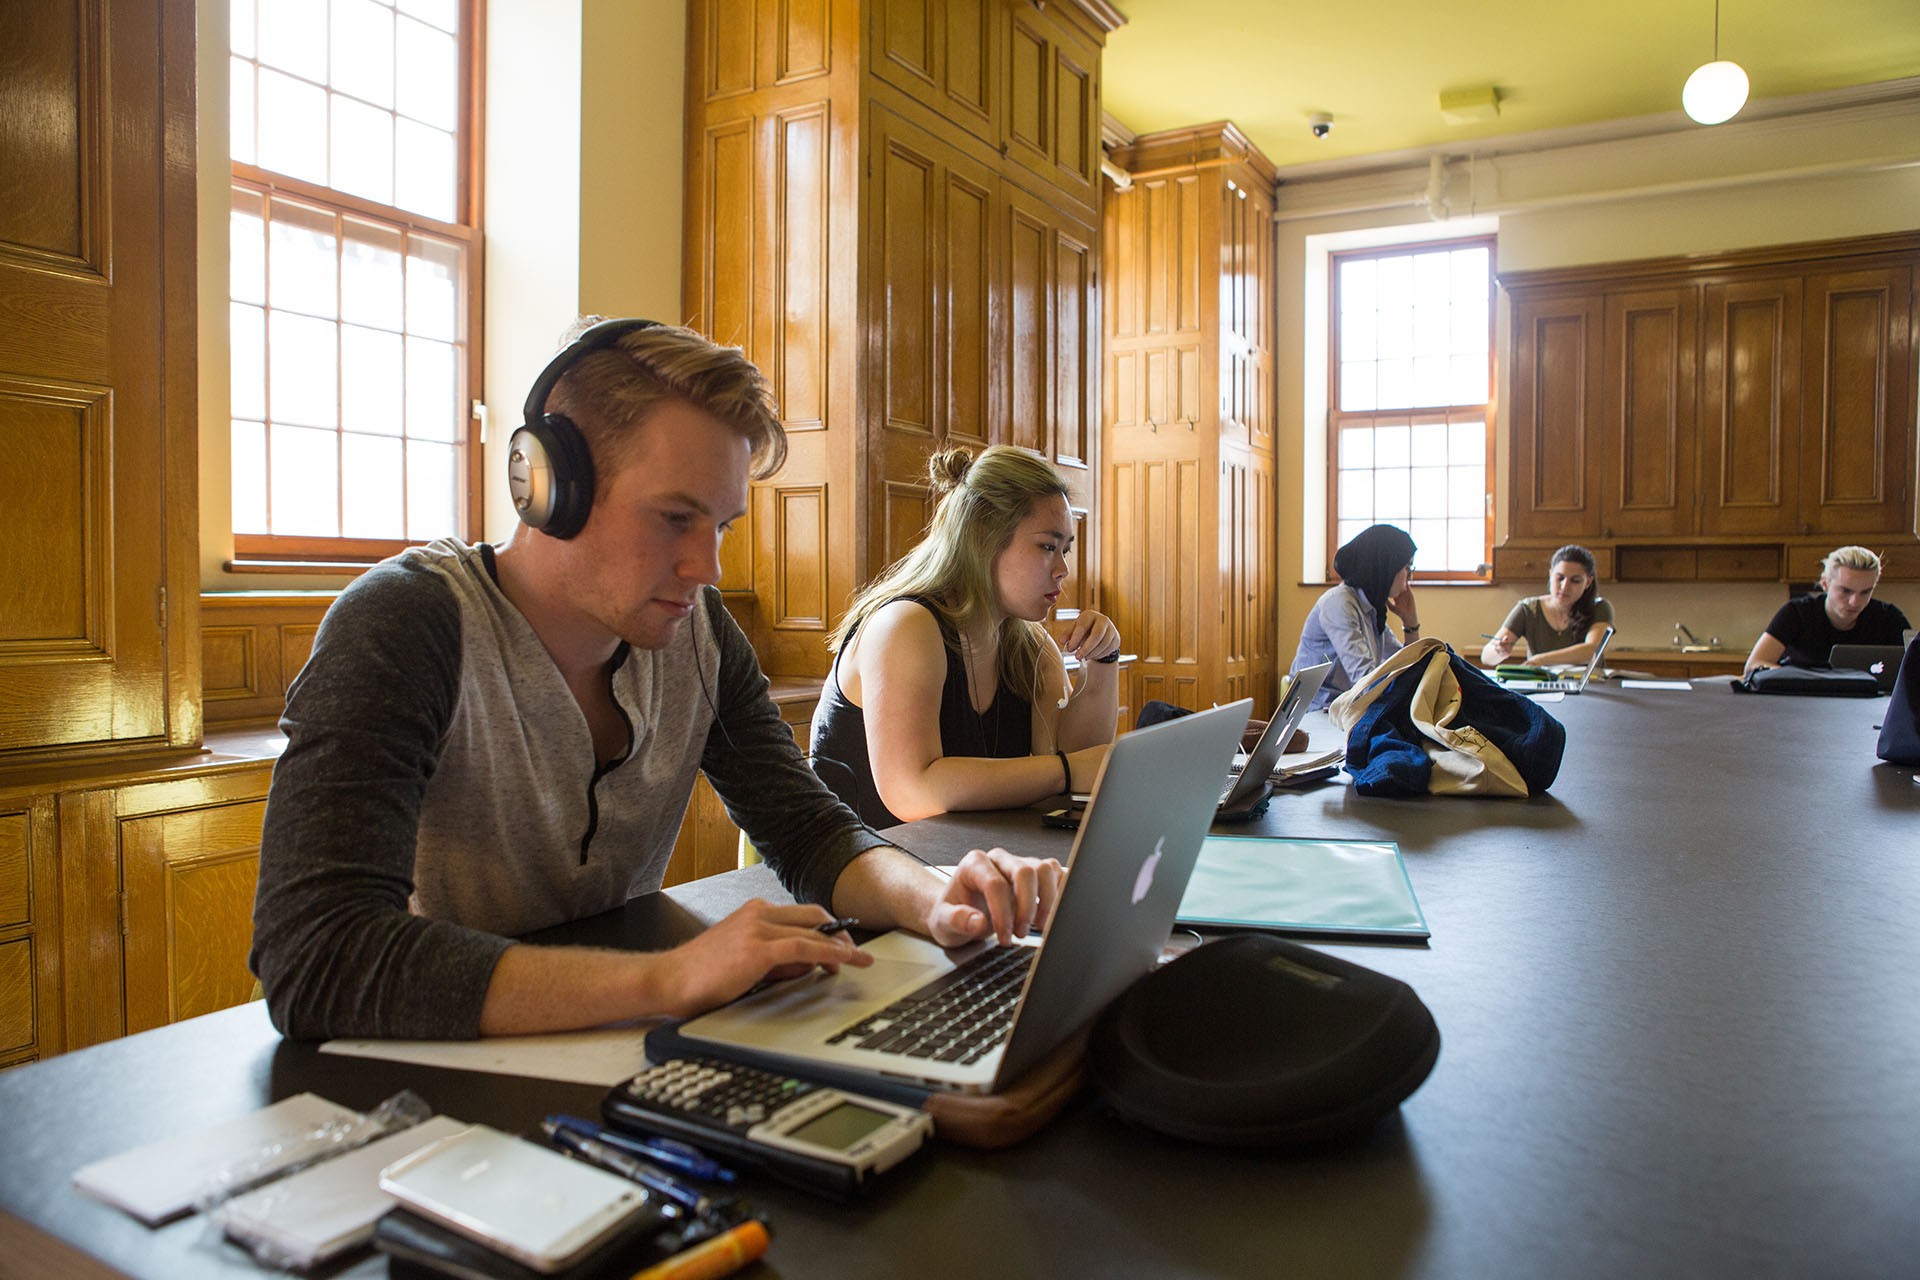 Students study at a large table in a brightly lit room with ornate wooden walls.